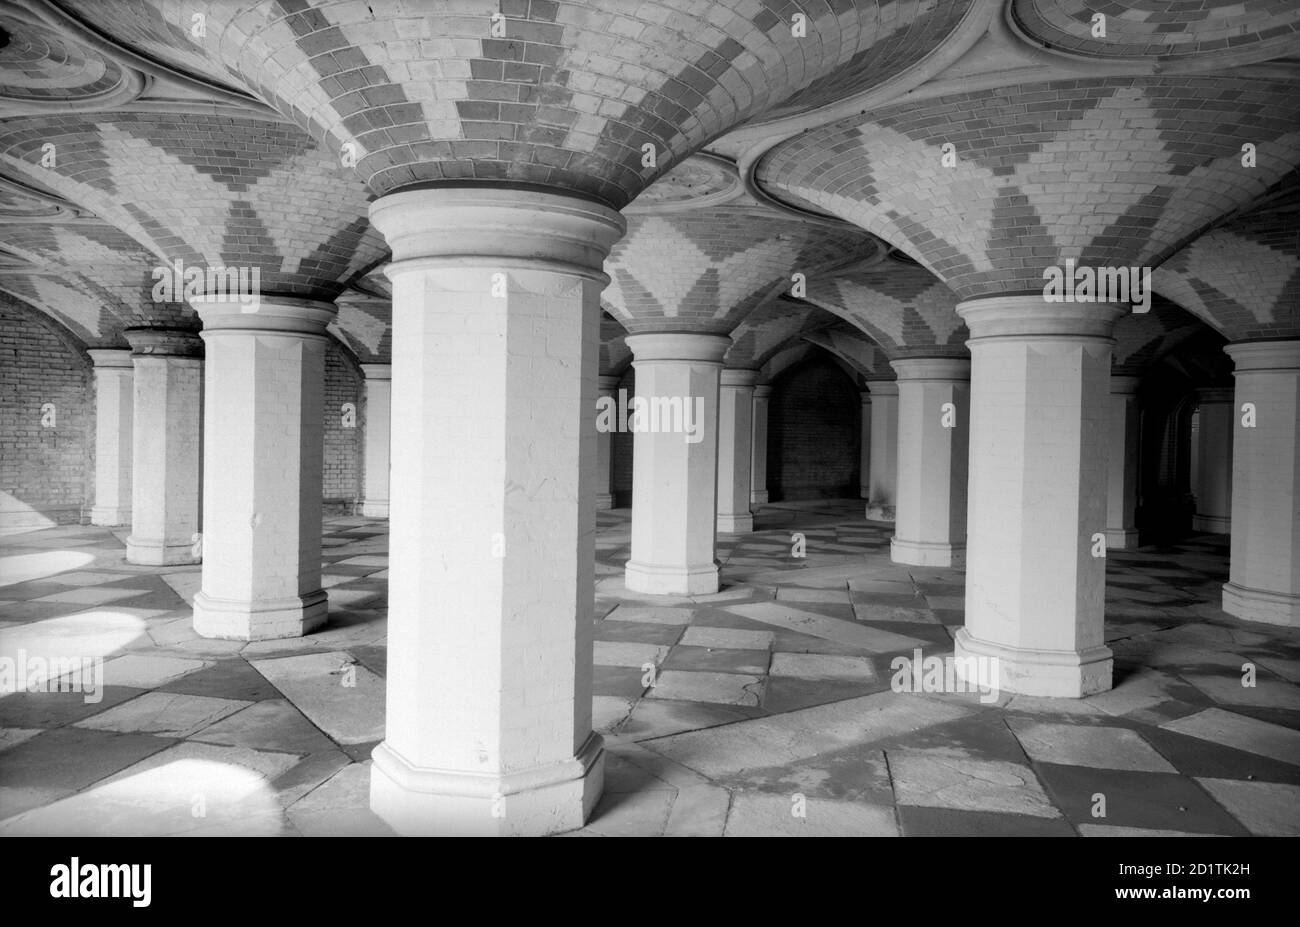 CRYSTAL PALACE, Sydenham, Greater London. Interior view showing the entrance arcade from the station below the Crystal Palace Parade. Photographed by Eric de Mare between 1945 and 1980. Stock Photo